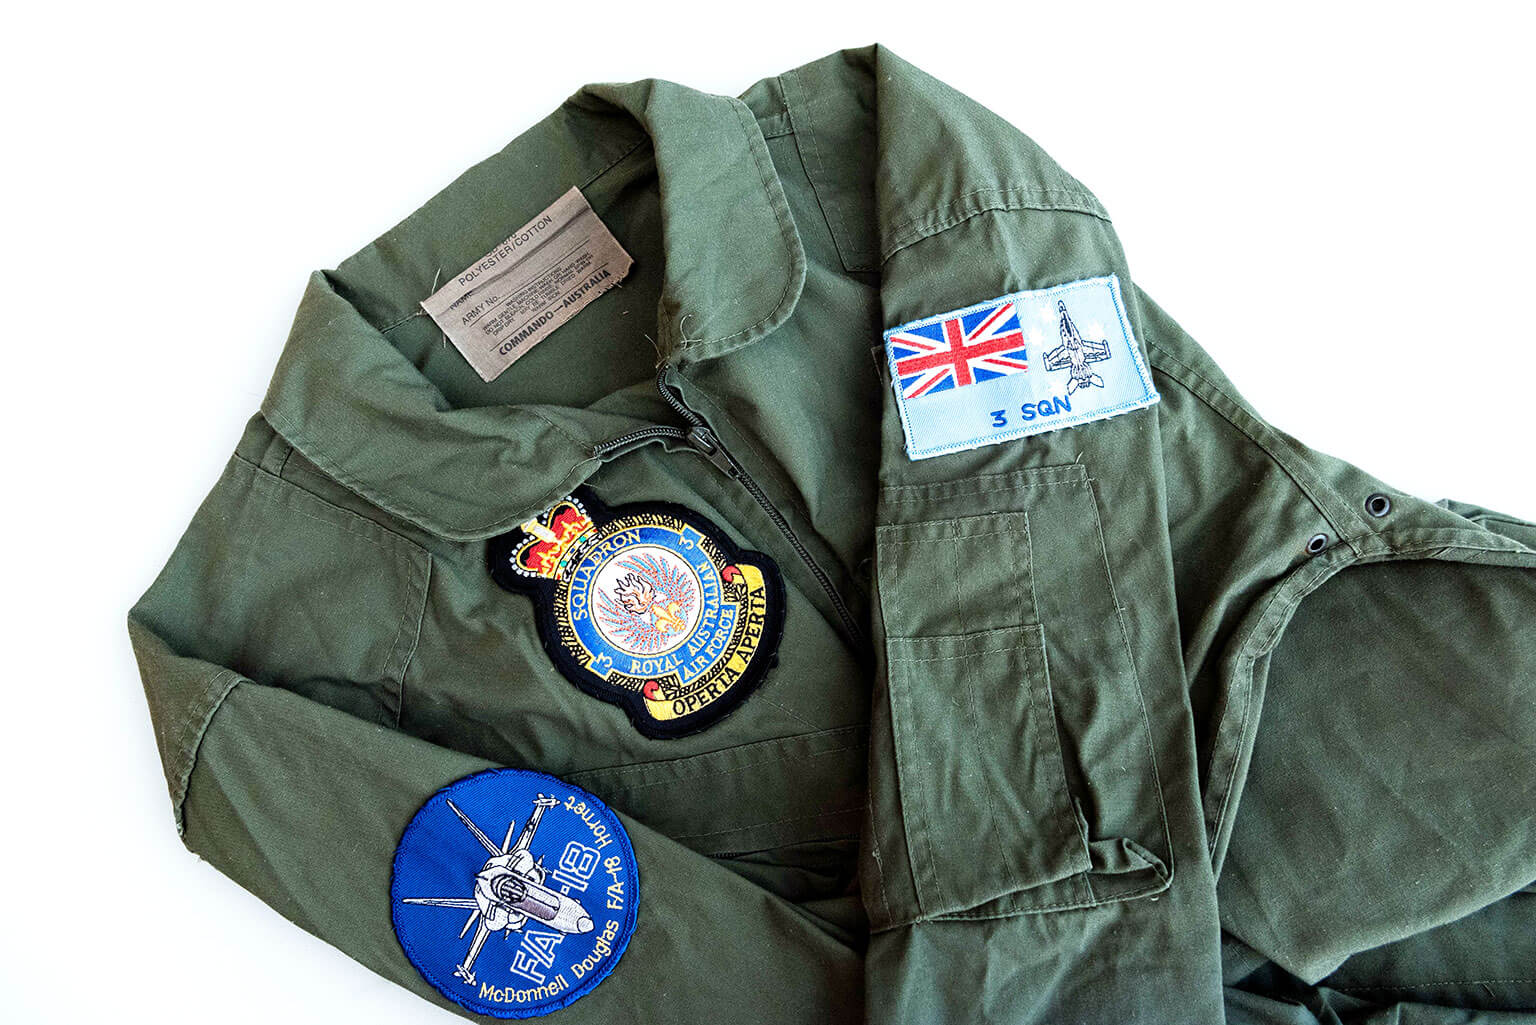 Pictured is a flight suit that U.S. Air Force Academy Cadet 1st Class Zachary Curd’s friend from No. 3 Royal Australian Air Force F-18 squadron gave him after he earned his Pilot Trainee Air Force Specialty Code.